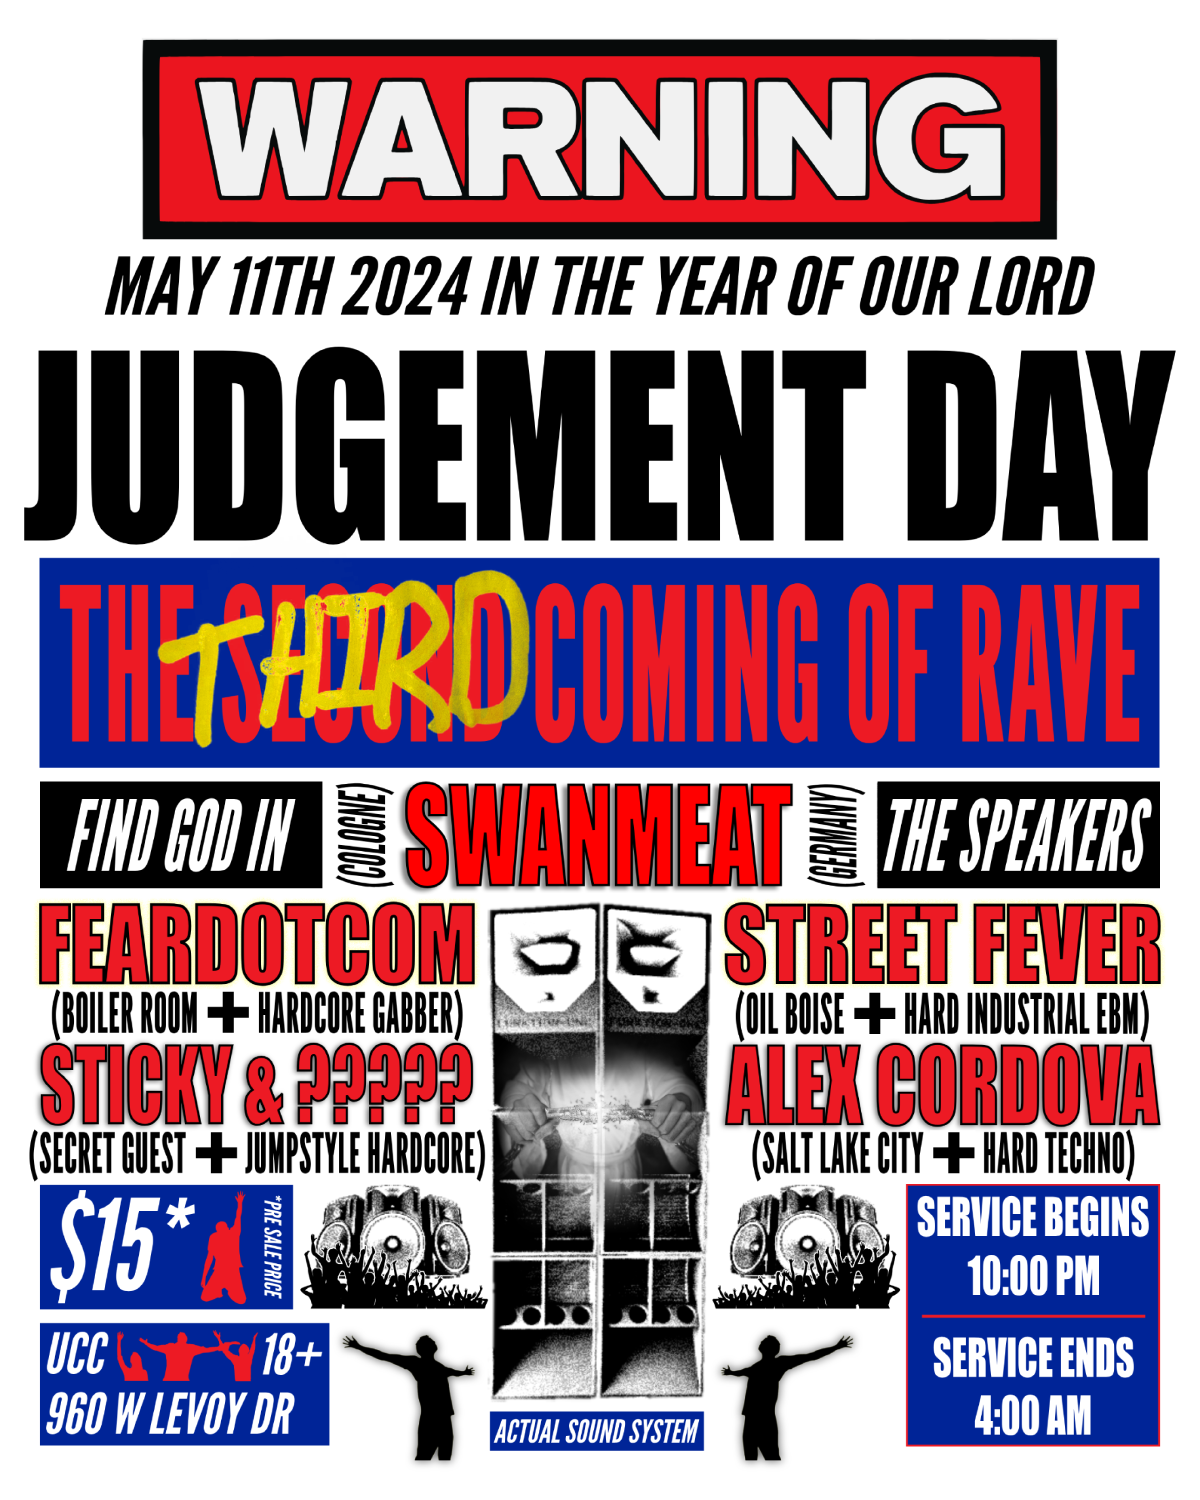 Third coming of rave! Judgement Day 2!